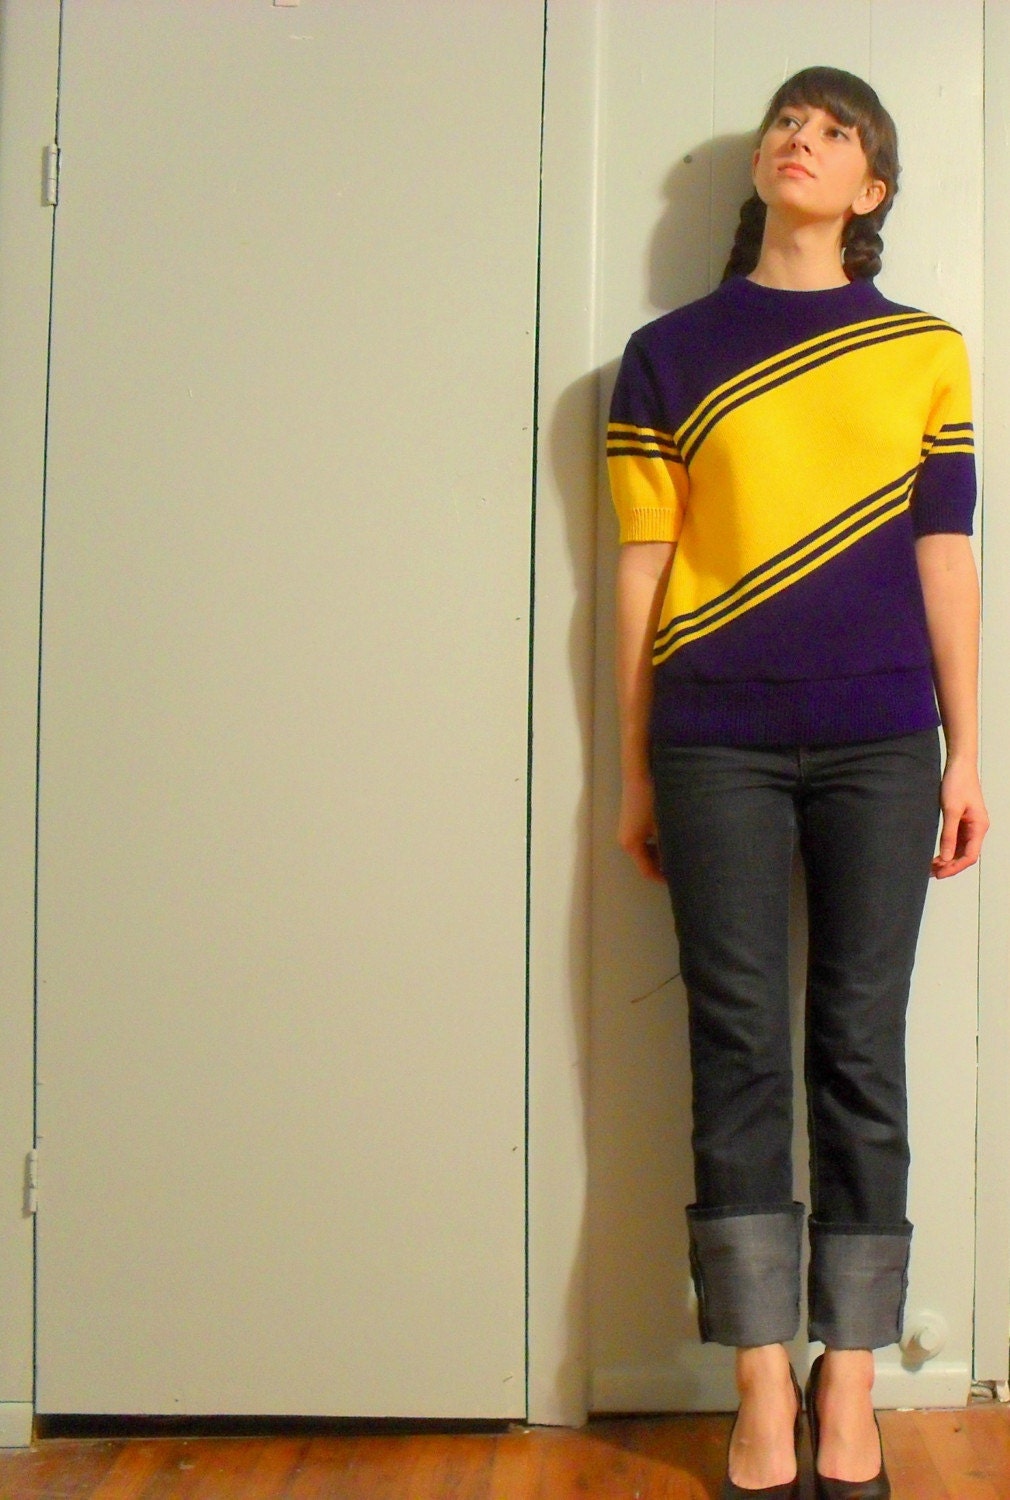 Vintage 80s cheerleader gold and purple short-sleeved sweater